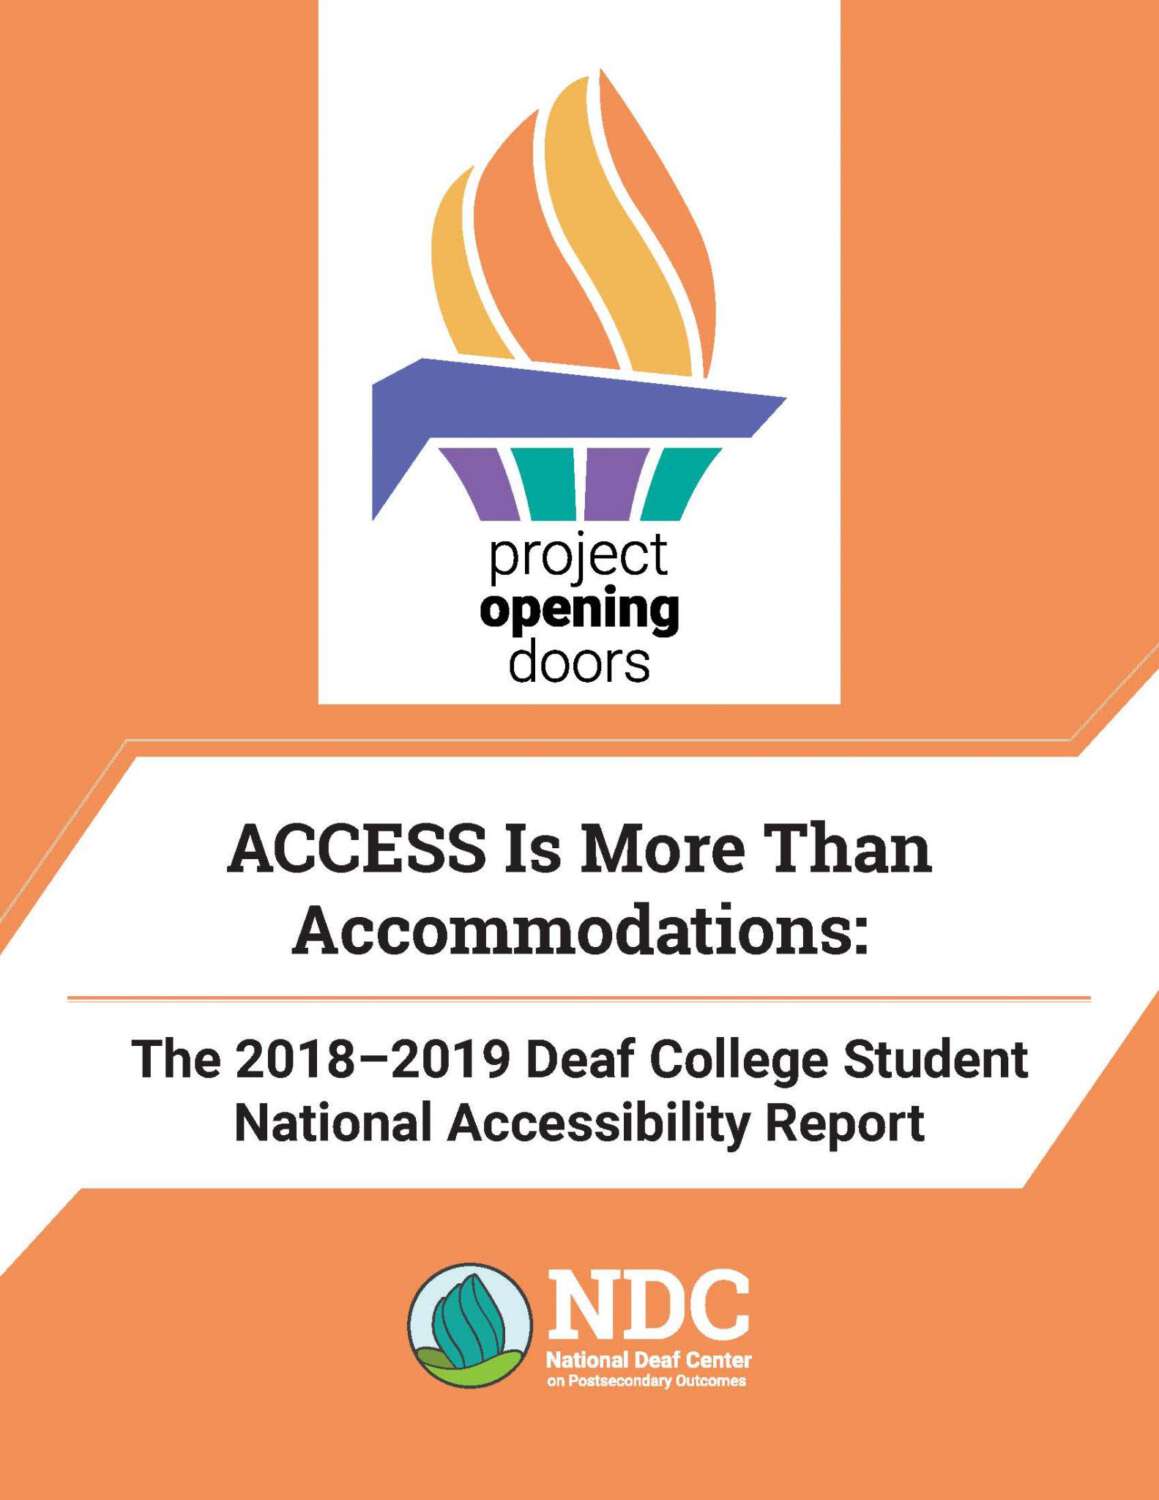 This image has an orange background. On the top center of the image, In a white space, there is a logo that depicts a flaming torch more subtly, and below is a text " project opening doors. There is more text in the middle of the page that reads " ACCESS is more than Accommodations:", and below it mentions " The 2018-2019 Deaf College Student Accessibility Report". And at the bottom center, there is the Logo of NDC.